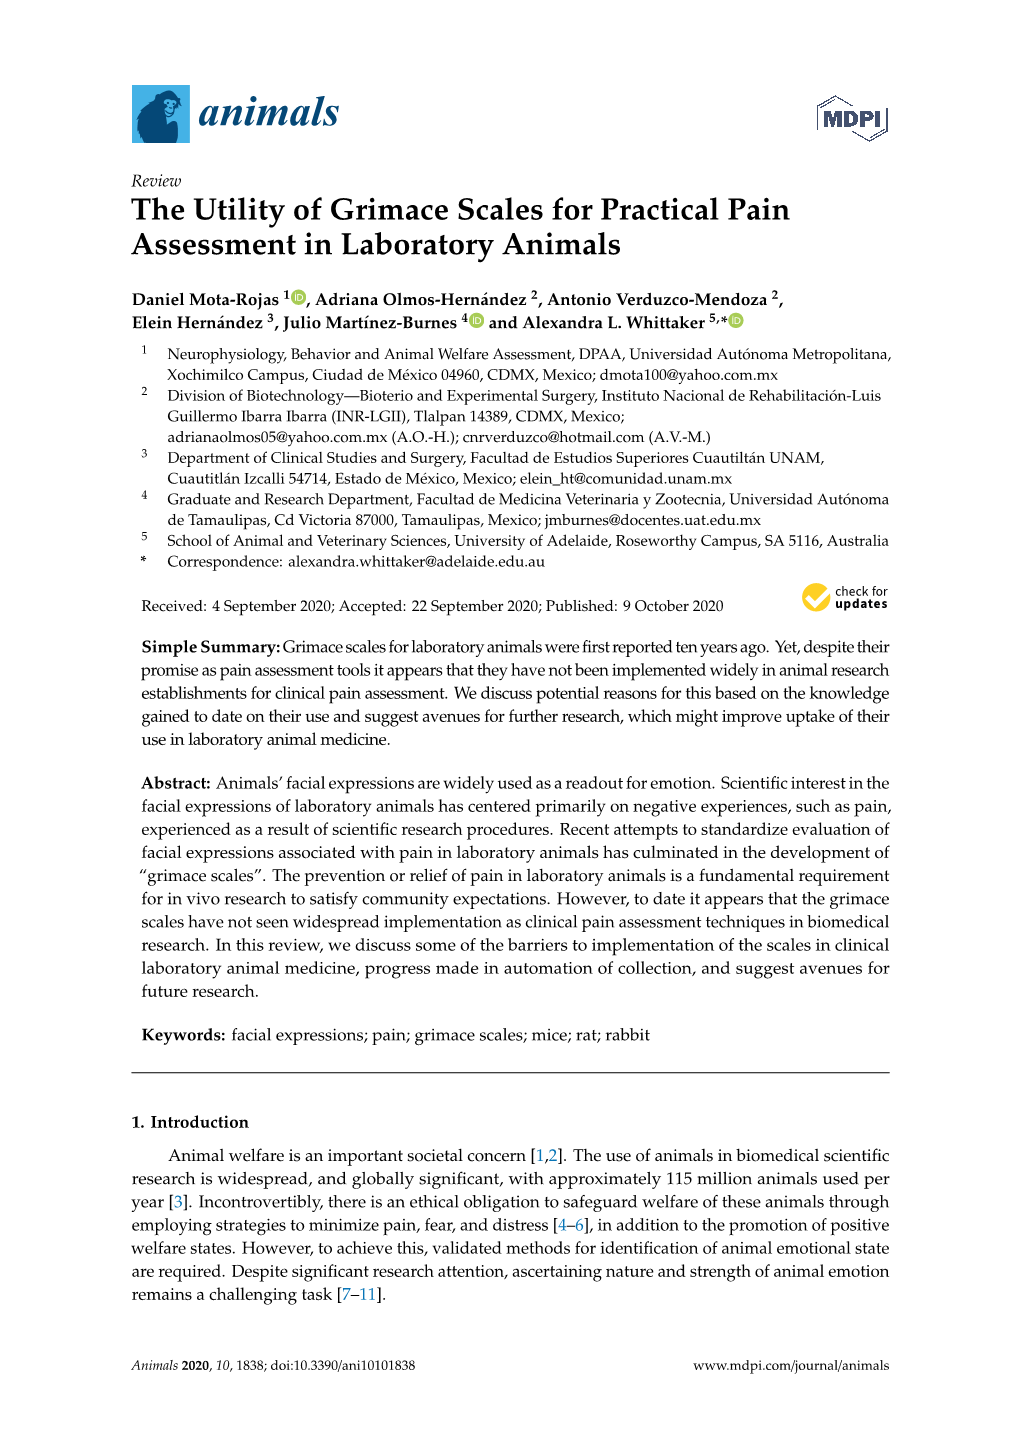 The Utility of Grimace Scales for Practical Pain Assessment in Laboratory Animals